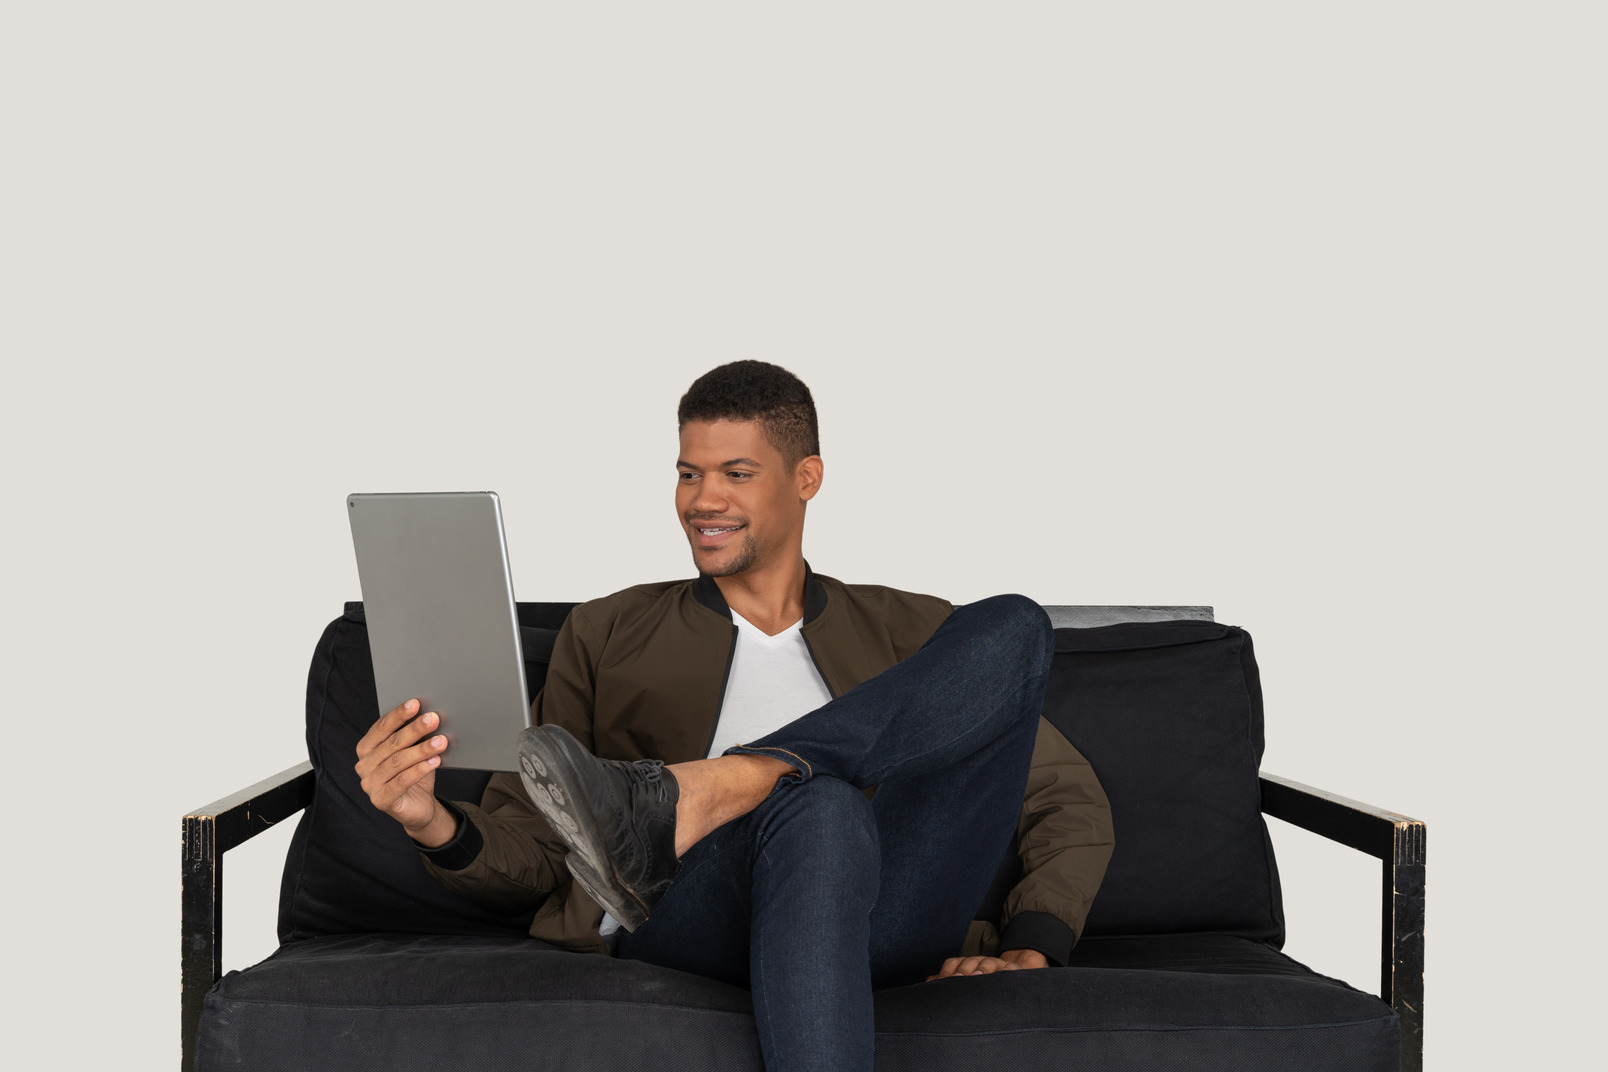 Front view of a smiling young man sitting on a sofa while watching the tablet